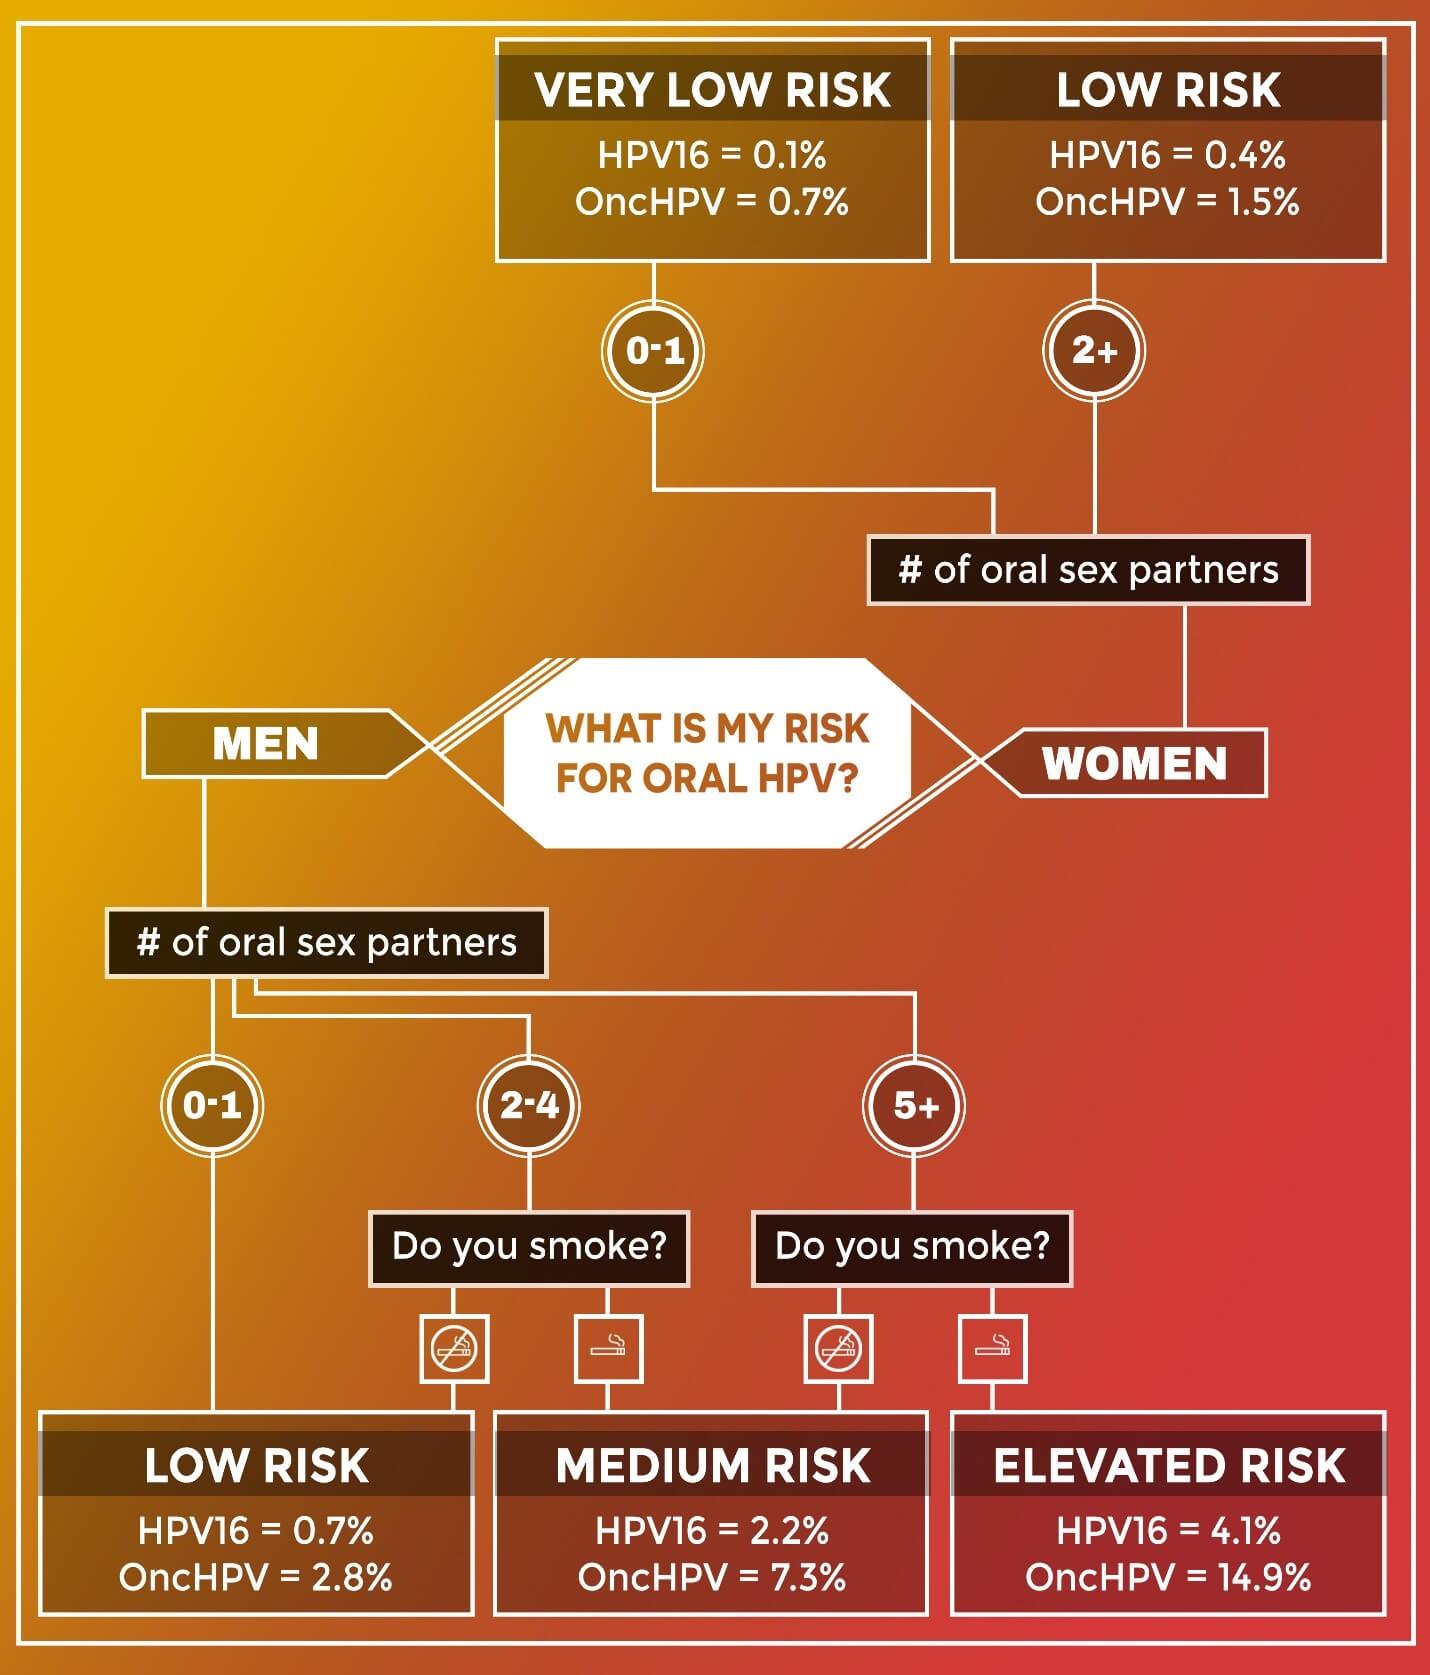 Flowchart of Risks of Oral HPV for Men and Women based on number of oral sex partners and smoking status